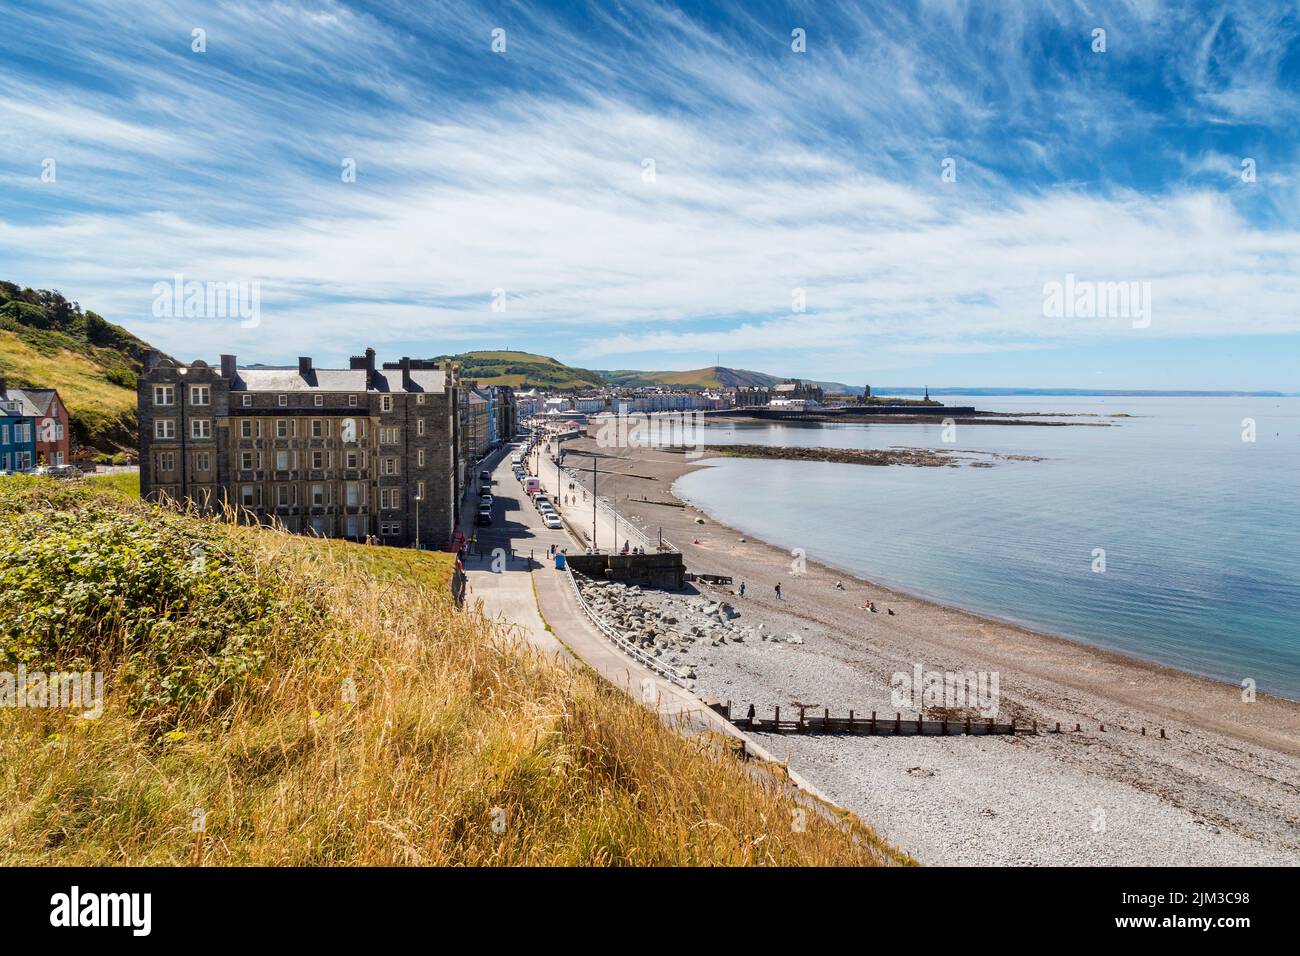 A view along the promenade and pebble beach at Aberystwyth, Wales. Stock Photo